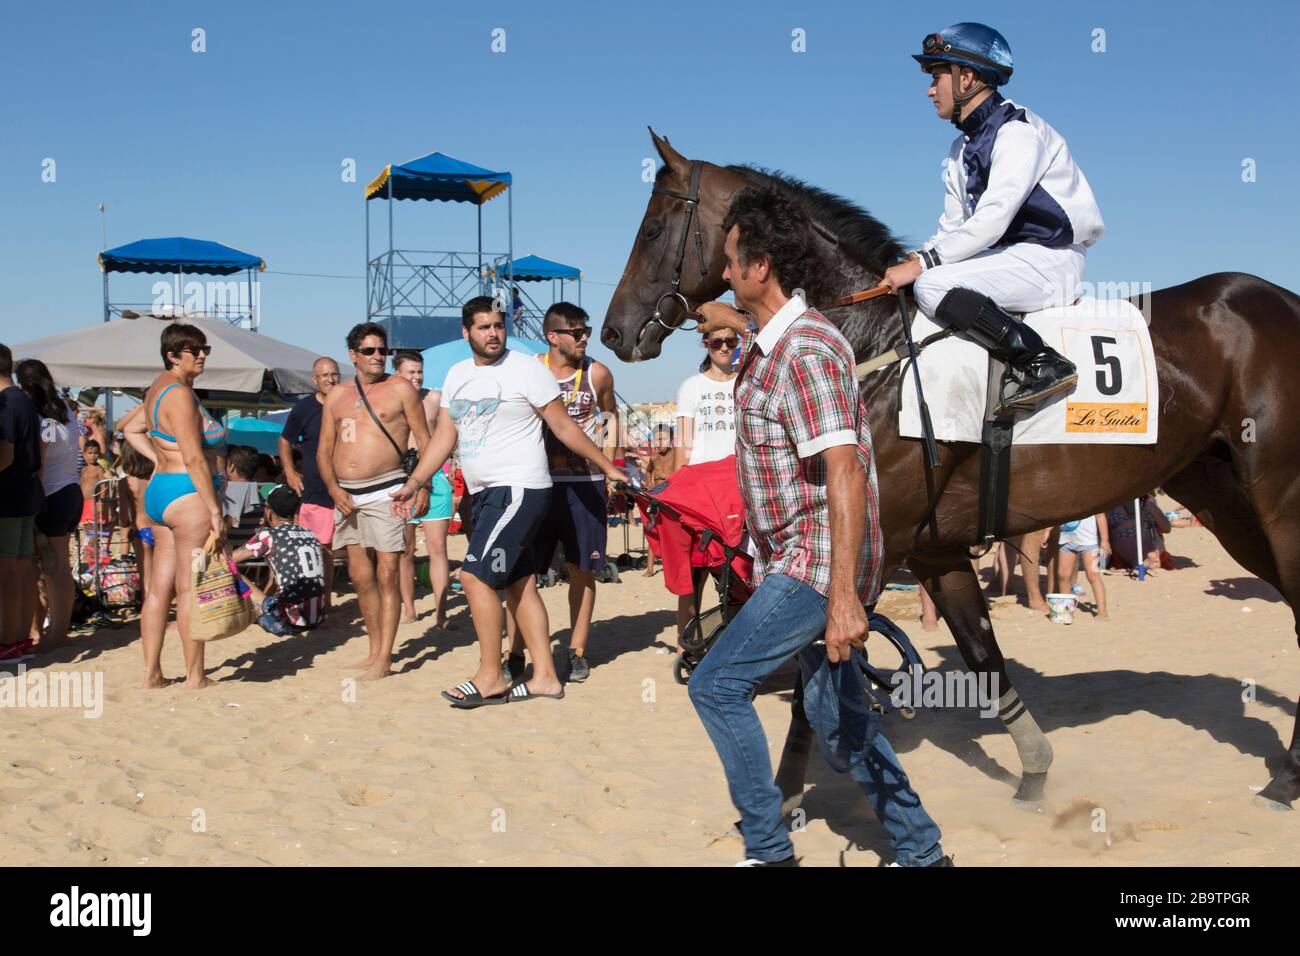 A mounted male jockey being led to the course during the annual August horserace meeting   on the beach at Sanlucar de Barrameda, Cadiz, Spain. 3rd Au Stock Photo